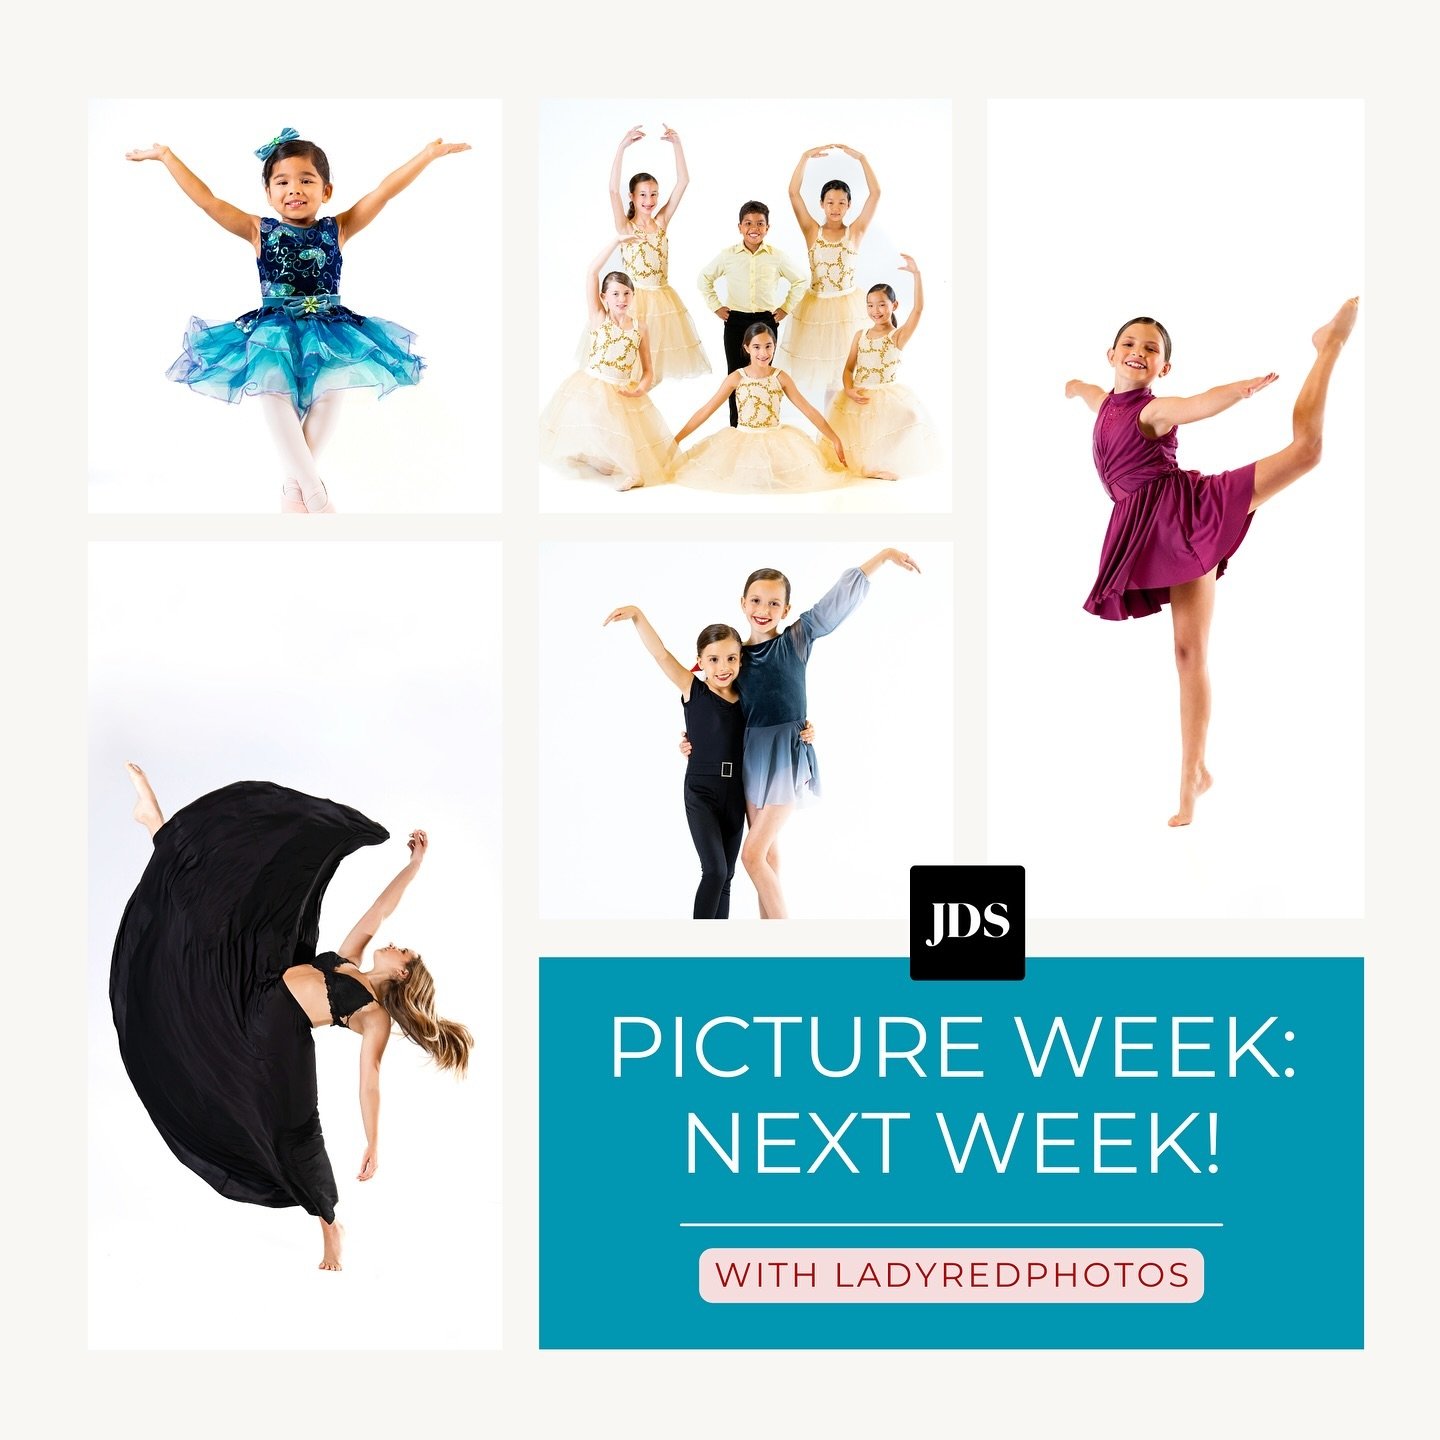 Don&rsquo;t forget! Next week is Picture Week with @ladyredphotos ! 📸🩵

May 13th - May 18th 
&bull;
&bull;
&bull;
#juliartdancestudio #juliartdance #pictureweek #dancephotos #dancephotography #recitalphotos #danceclassphotos #danceclassesforkids #k